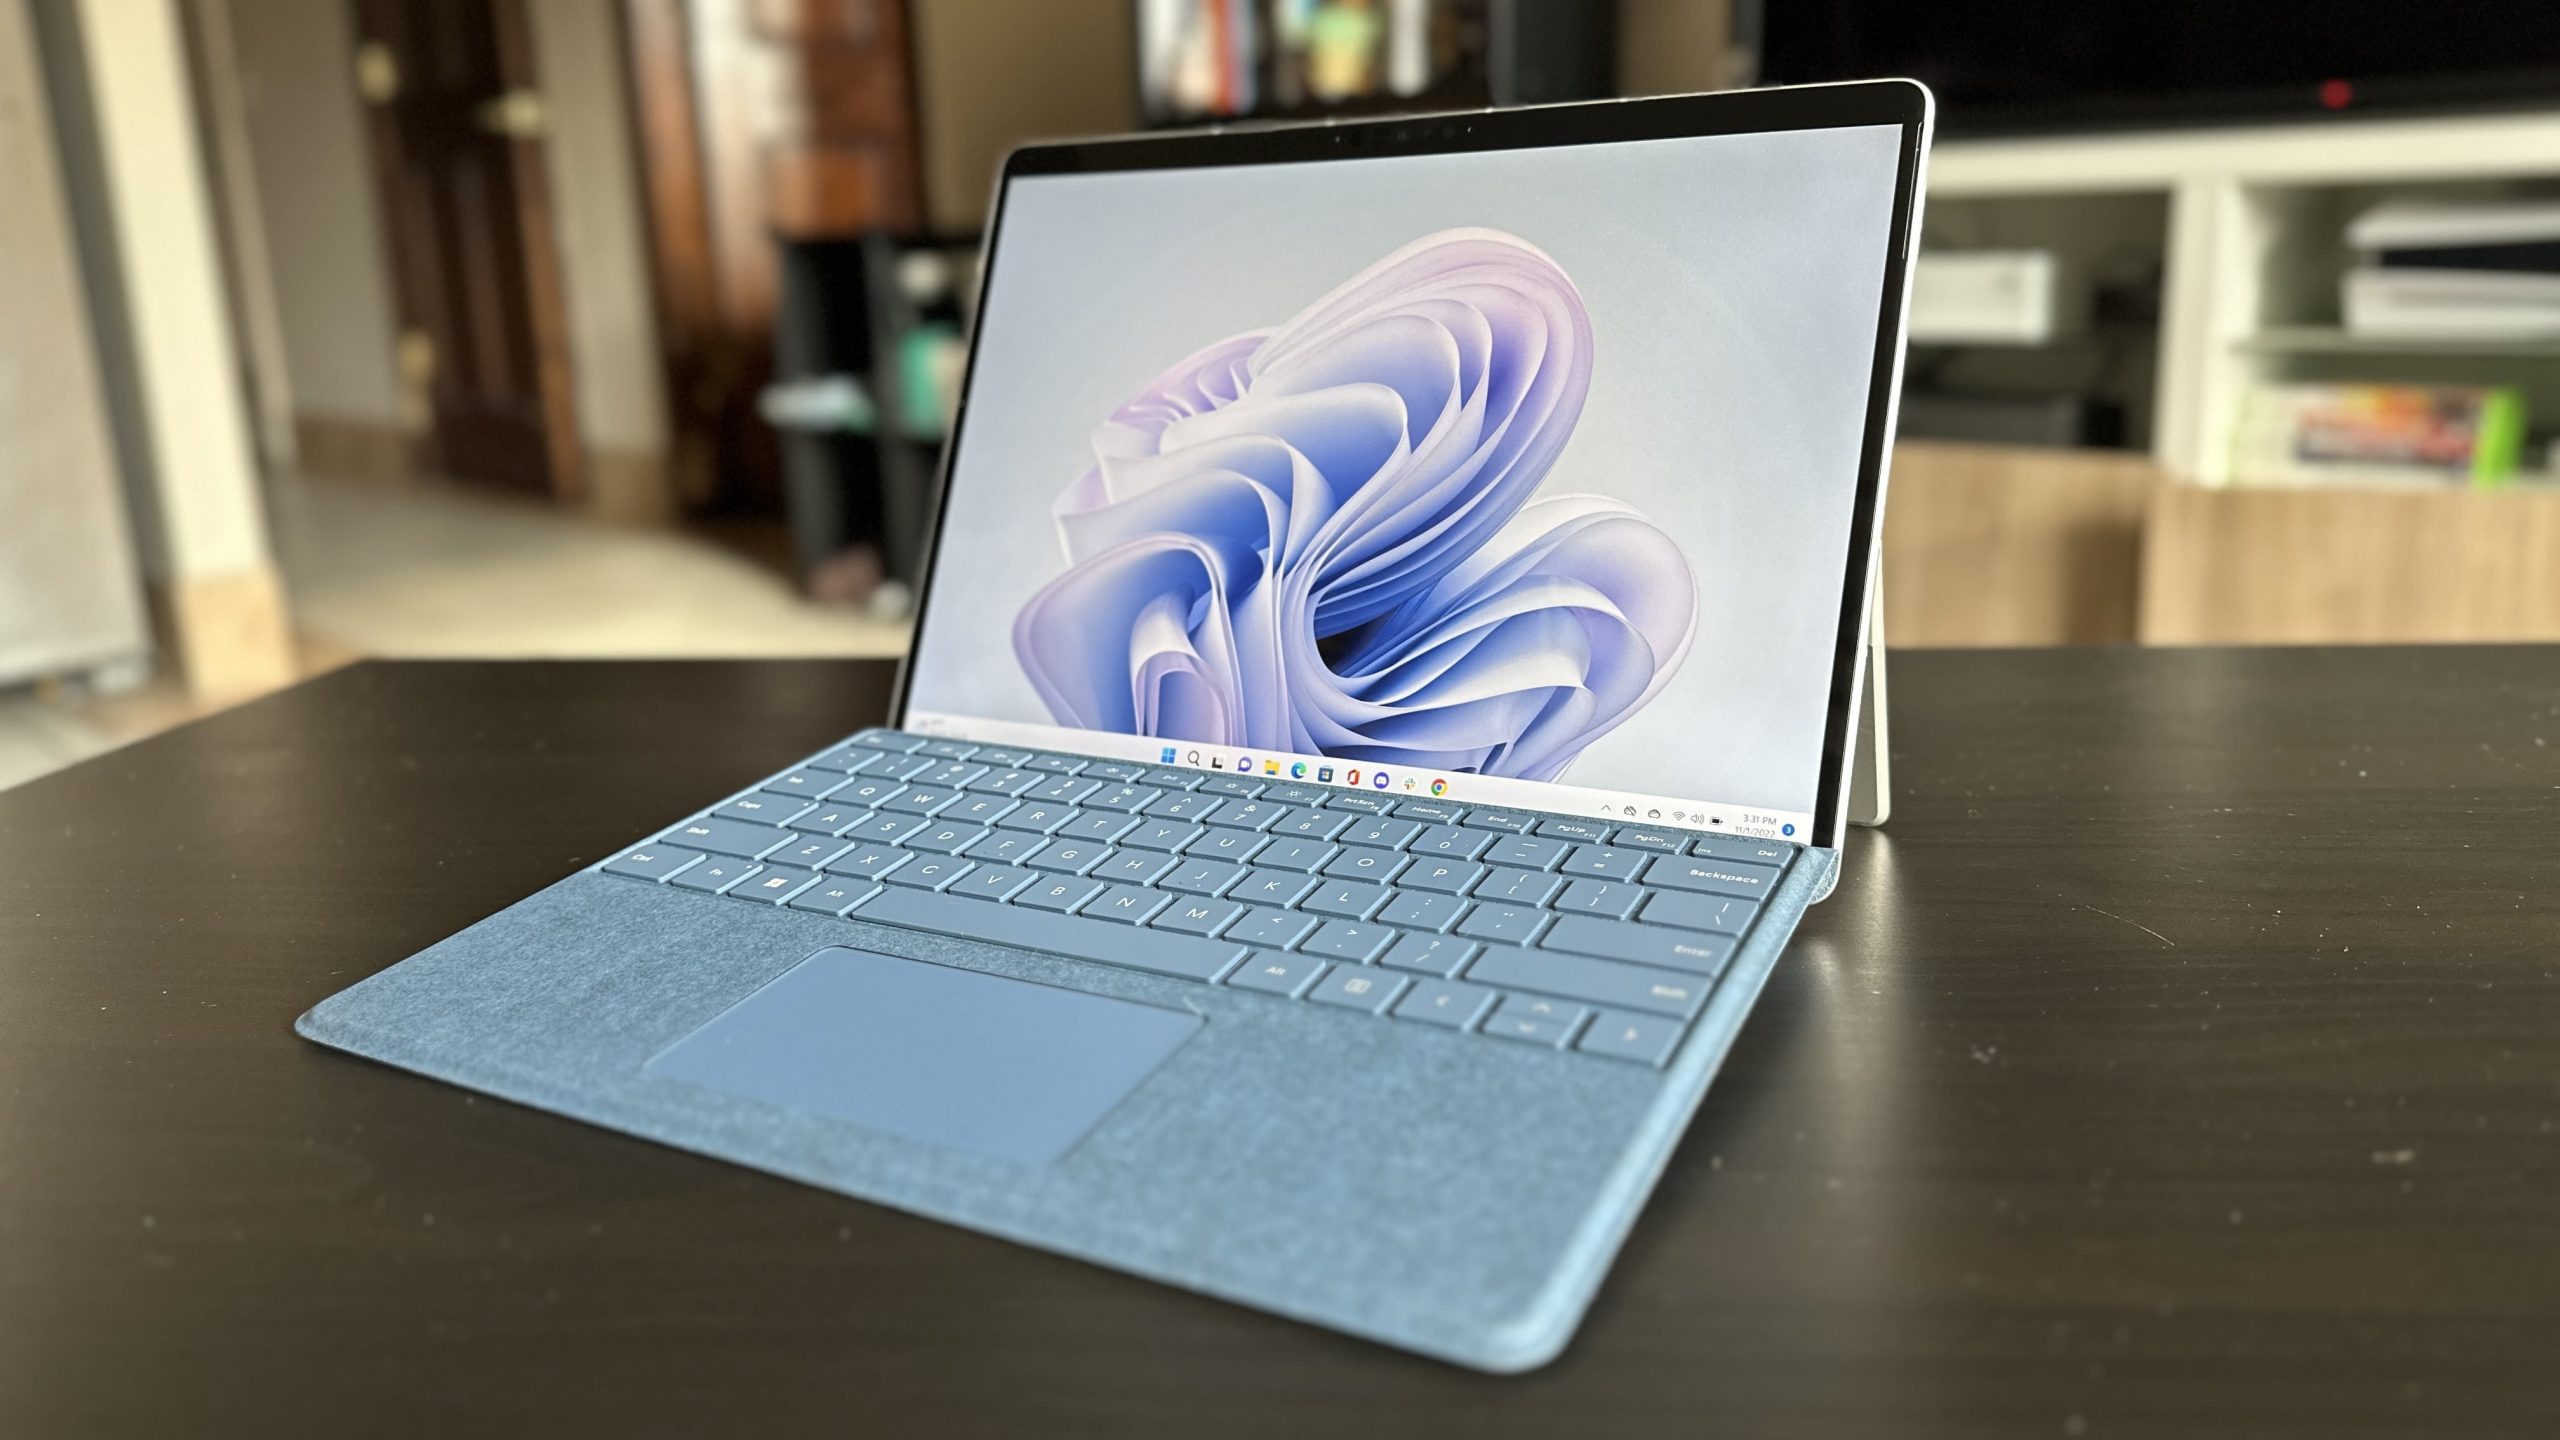 Microsoft Surface Pro 9 (Intel i7): Very light but expensive